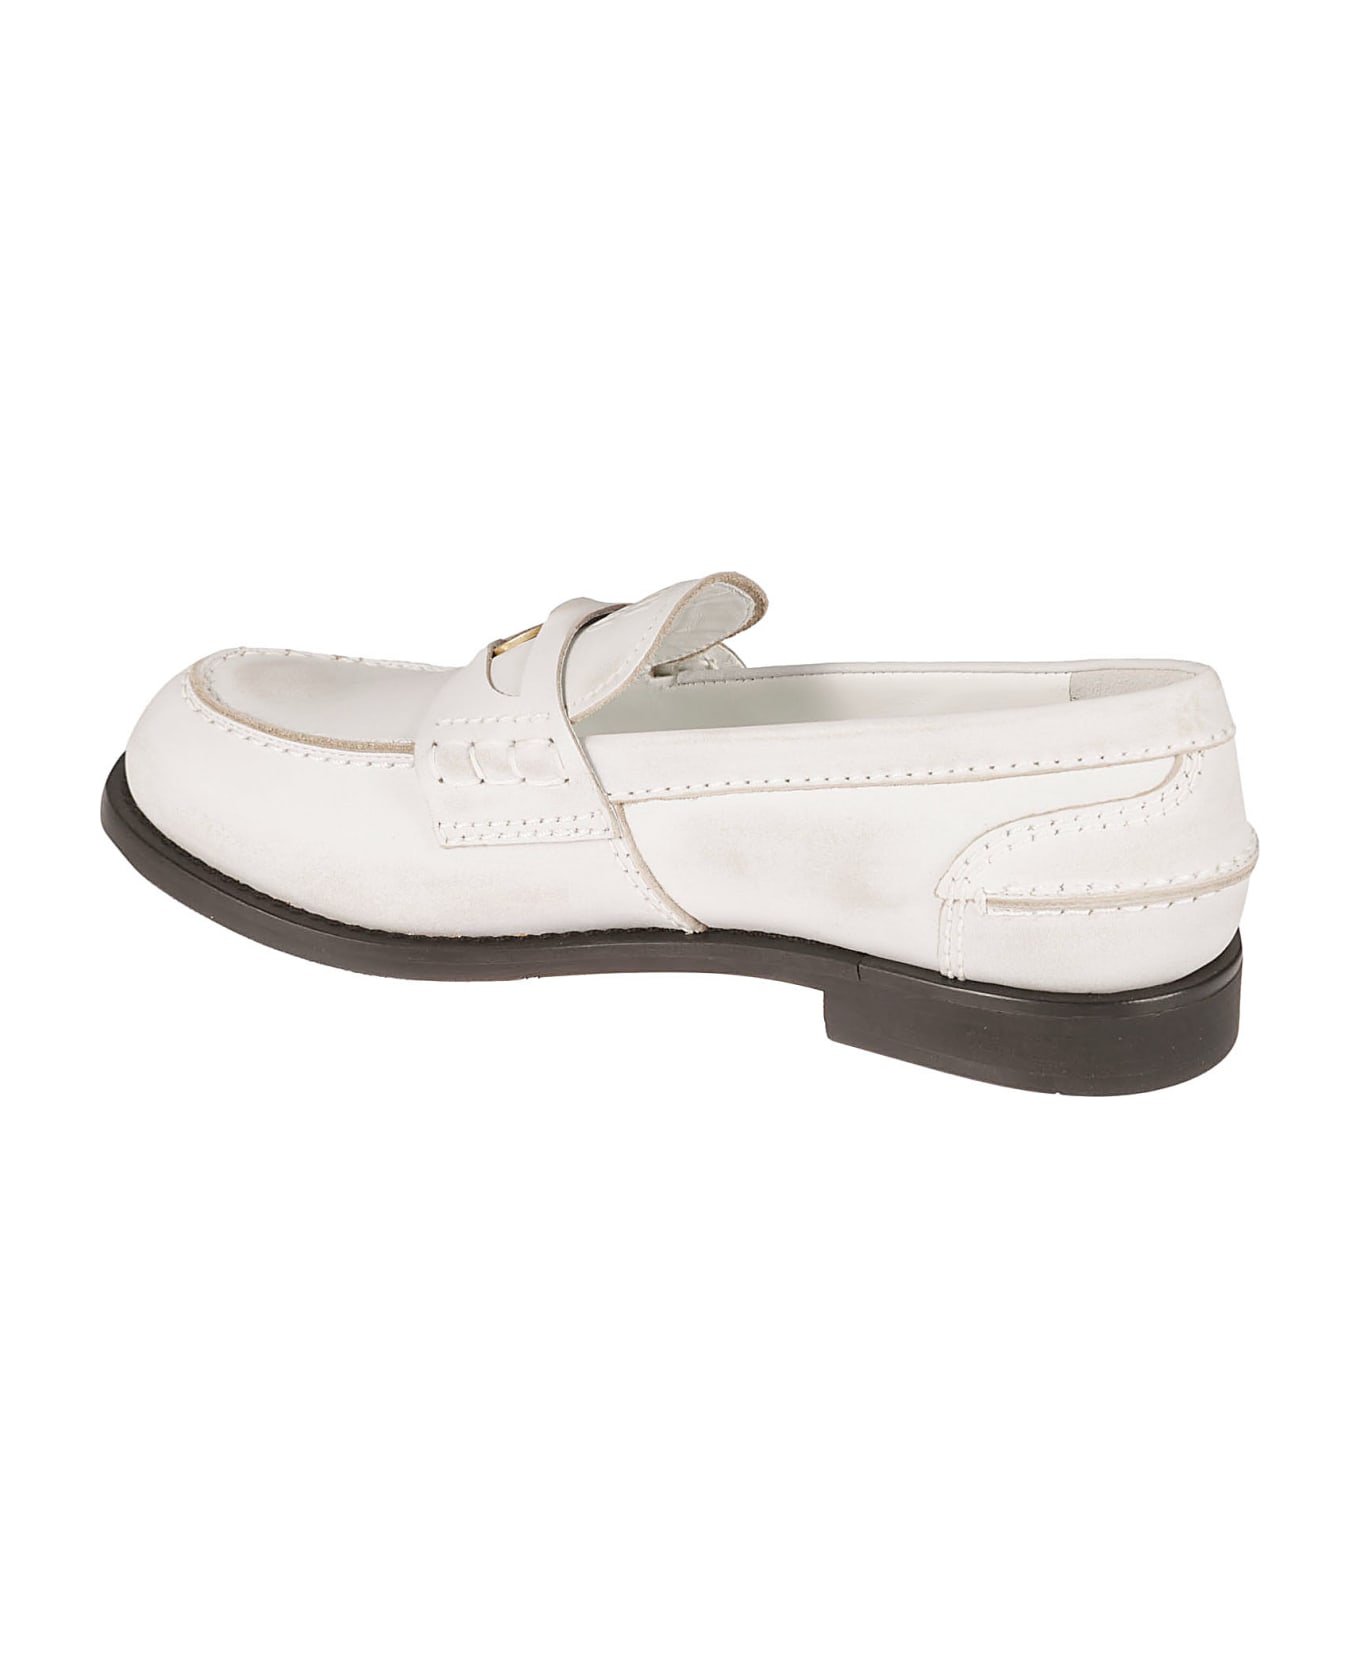 Miu Miu Logo Embossed Coin Applique Loafers - White